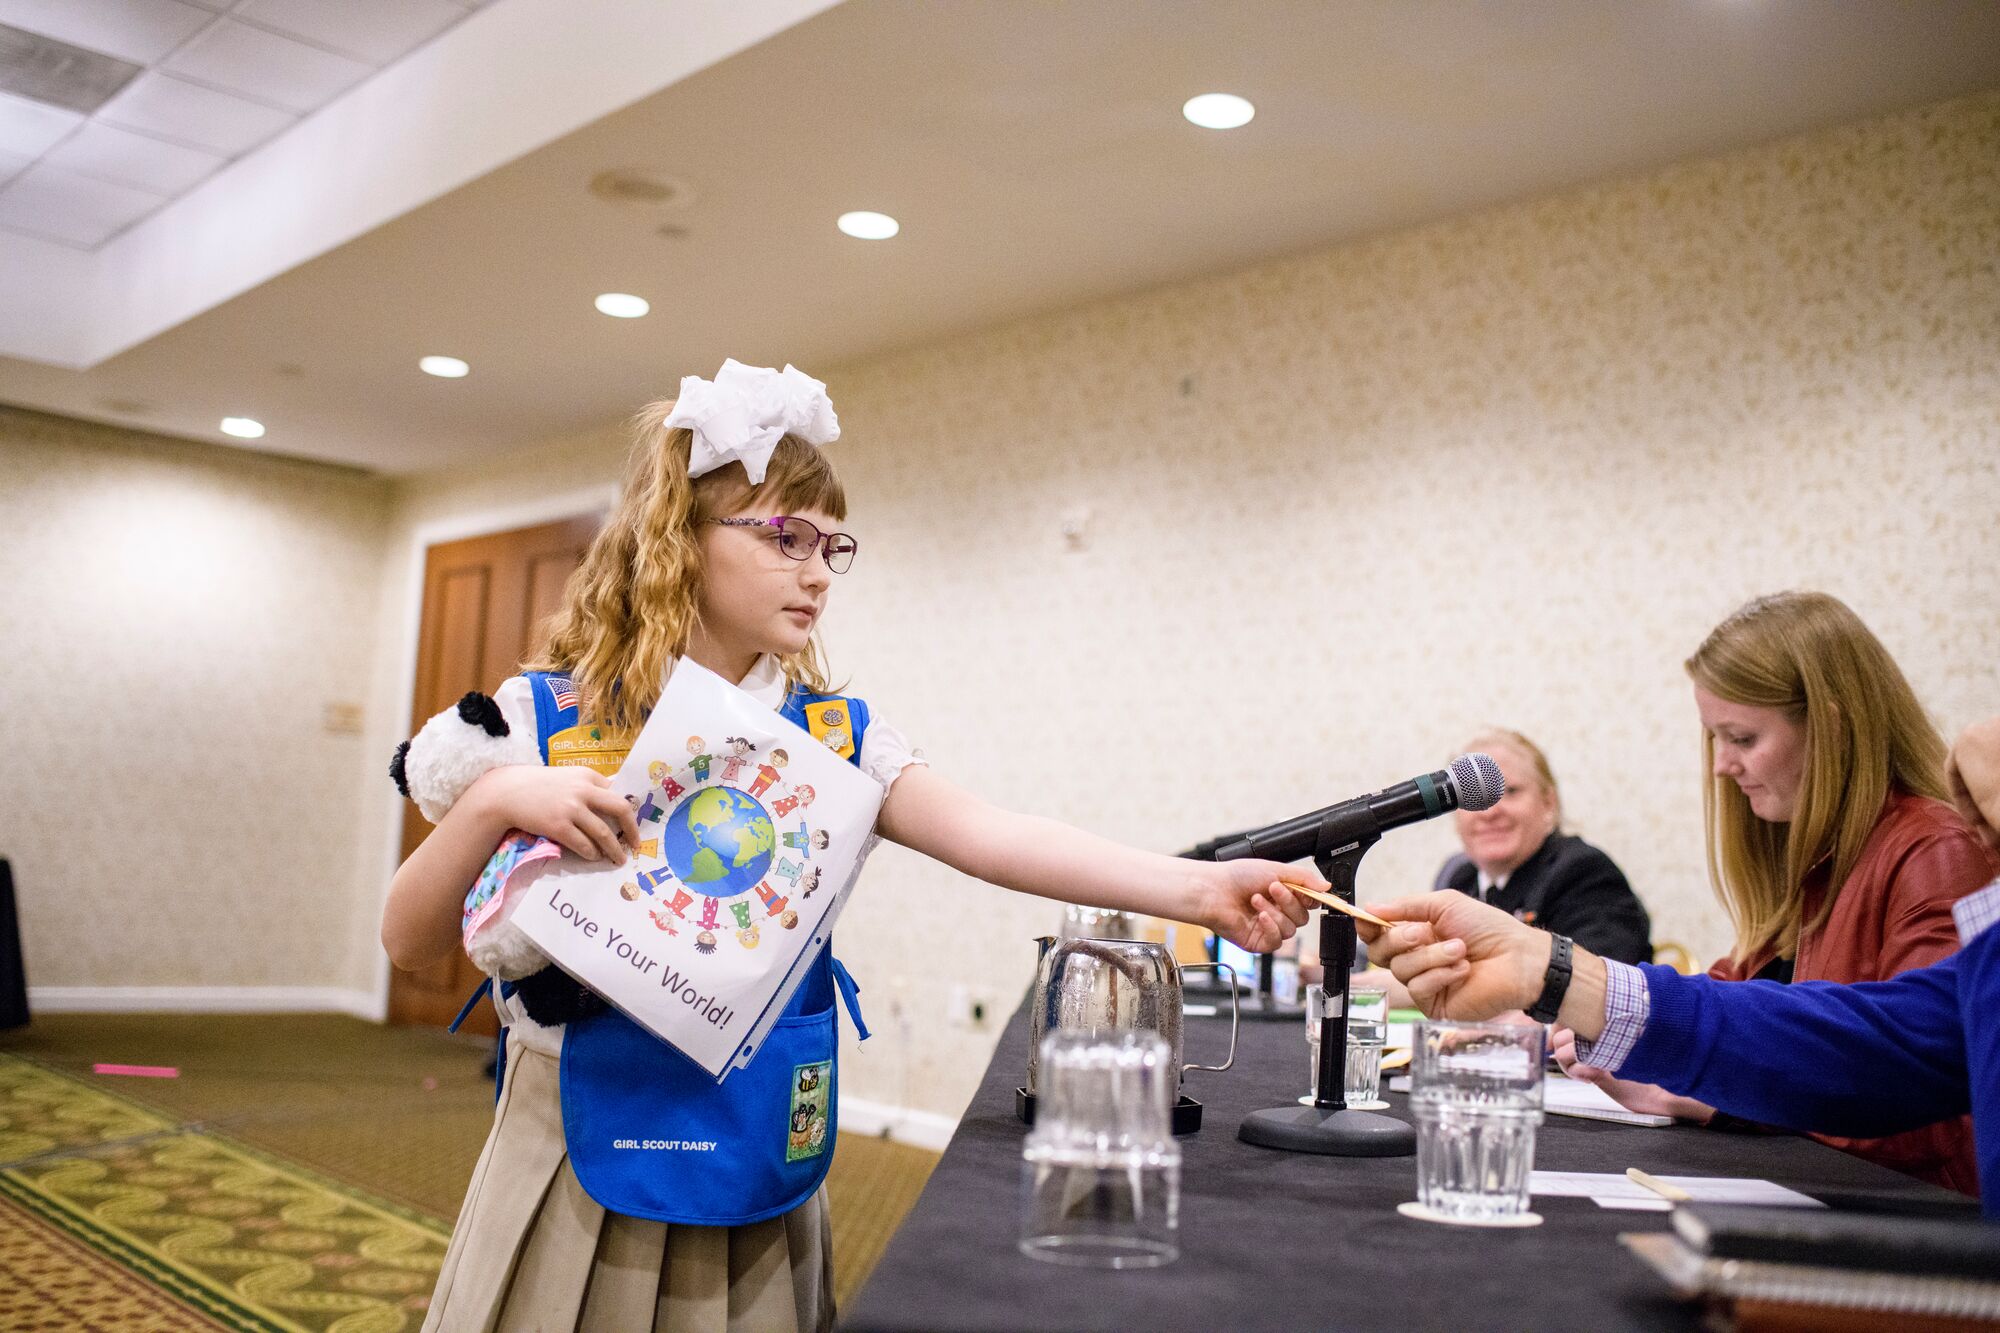 Alivia Hopkins, Girl Scout, speaks at an EPA hearing in 2018.